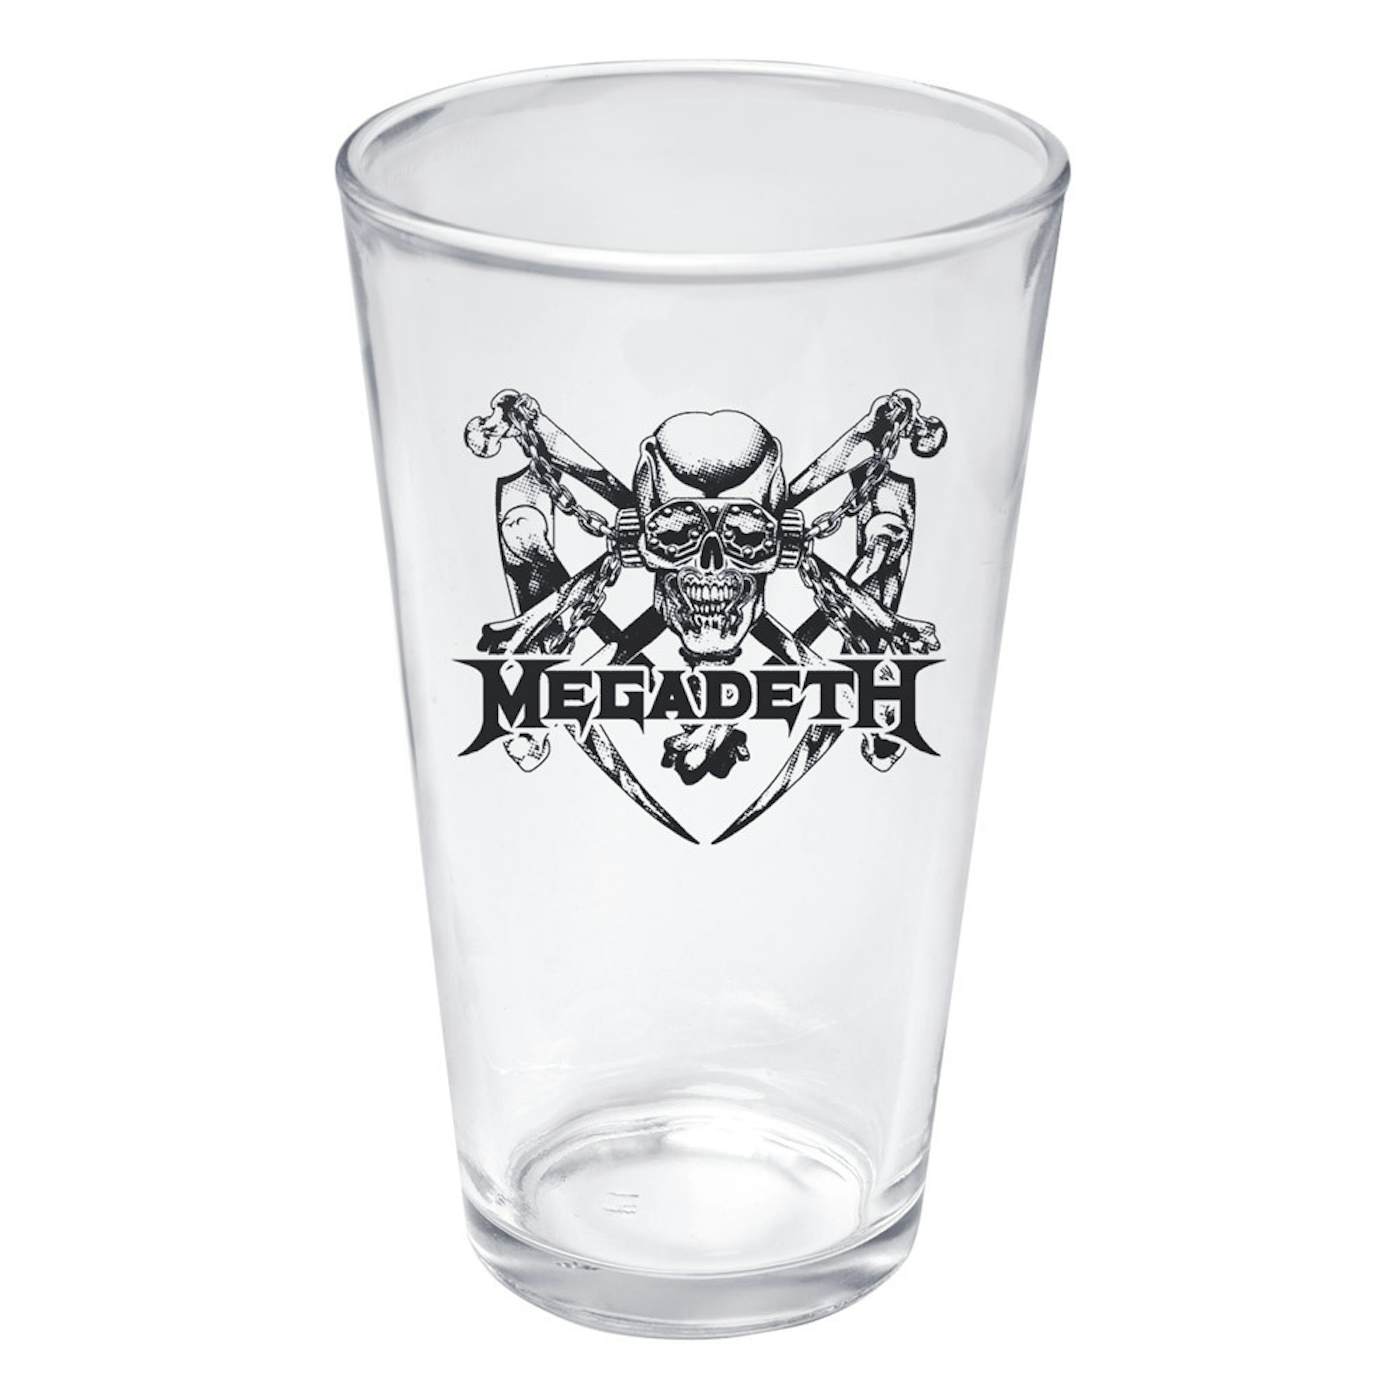 Exclusive - Megadeth Pint Glass